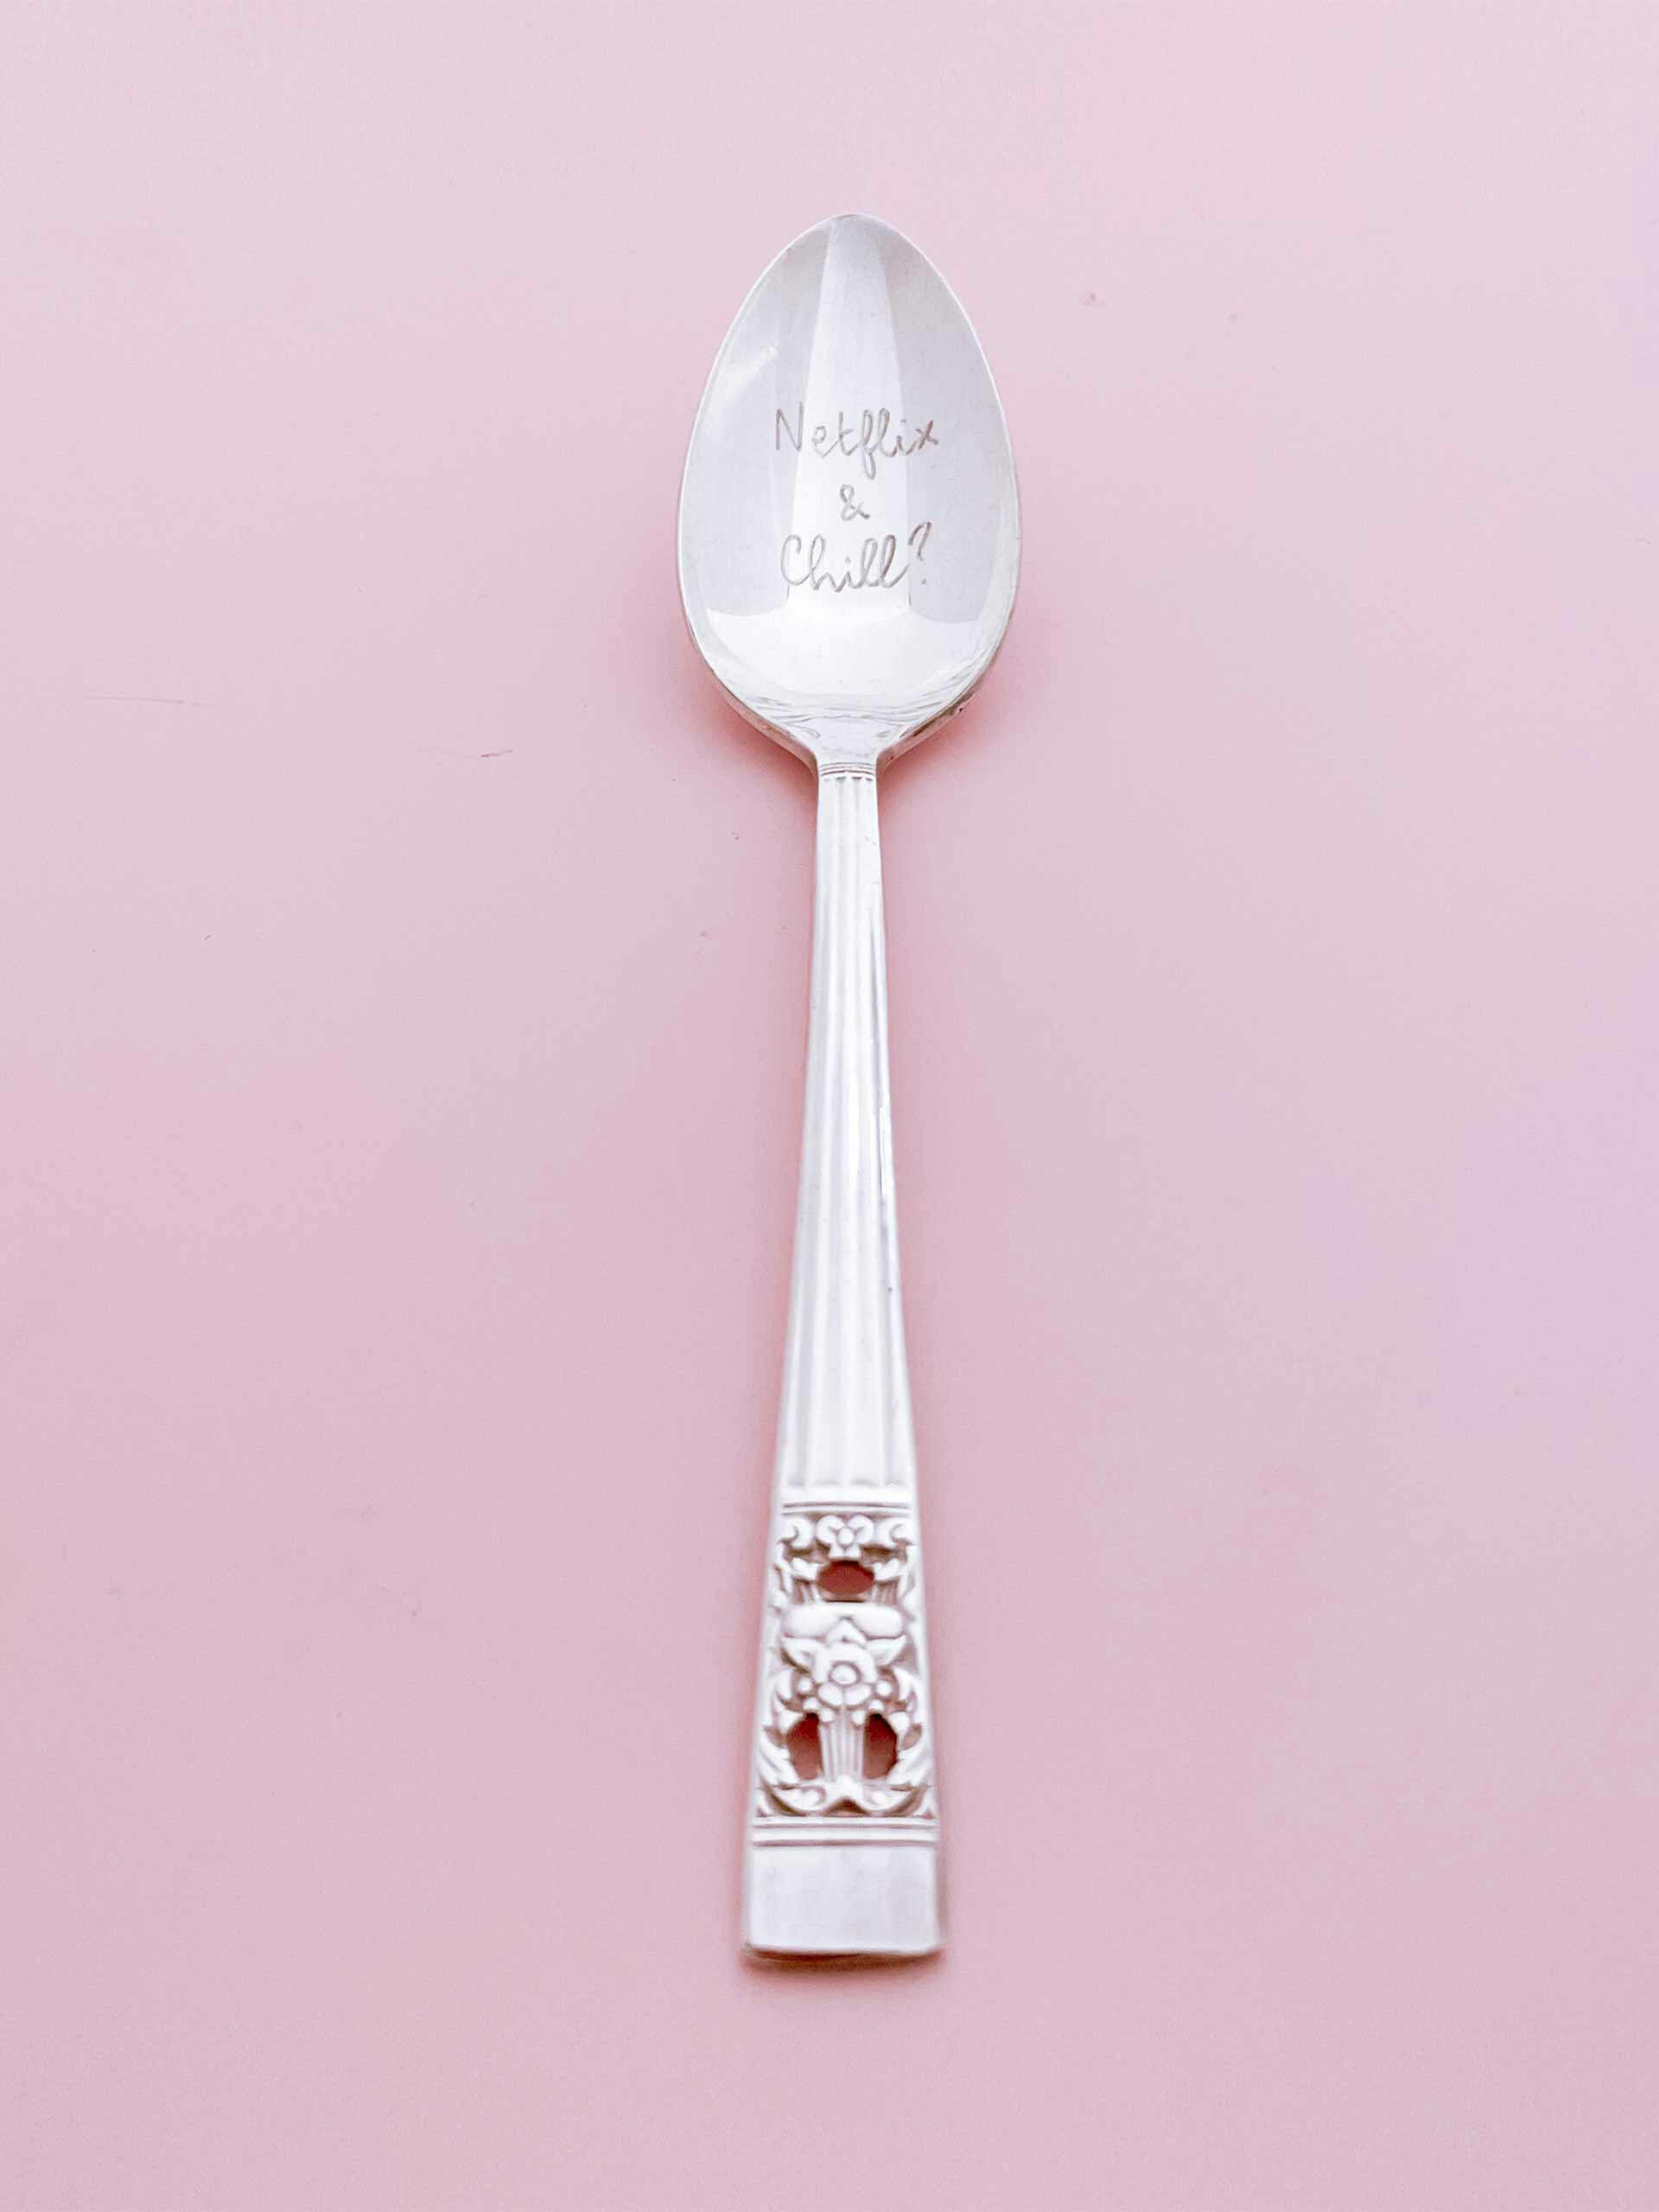 "Netflix and chill" engraved vintage spoon